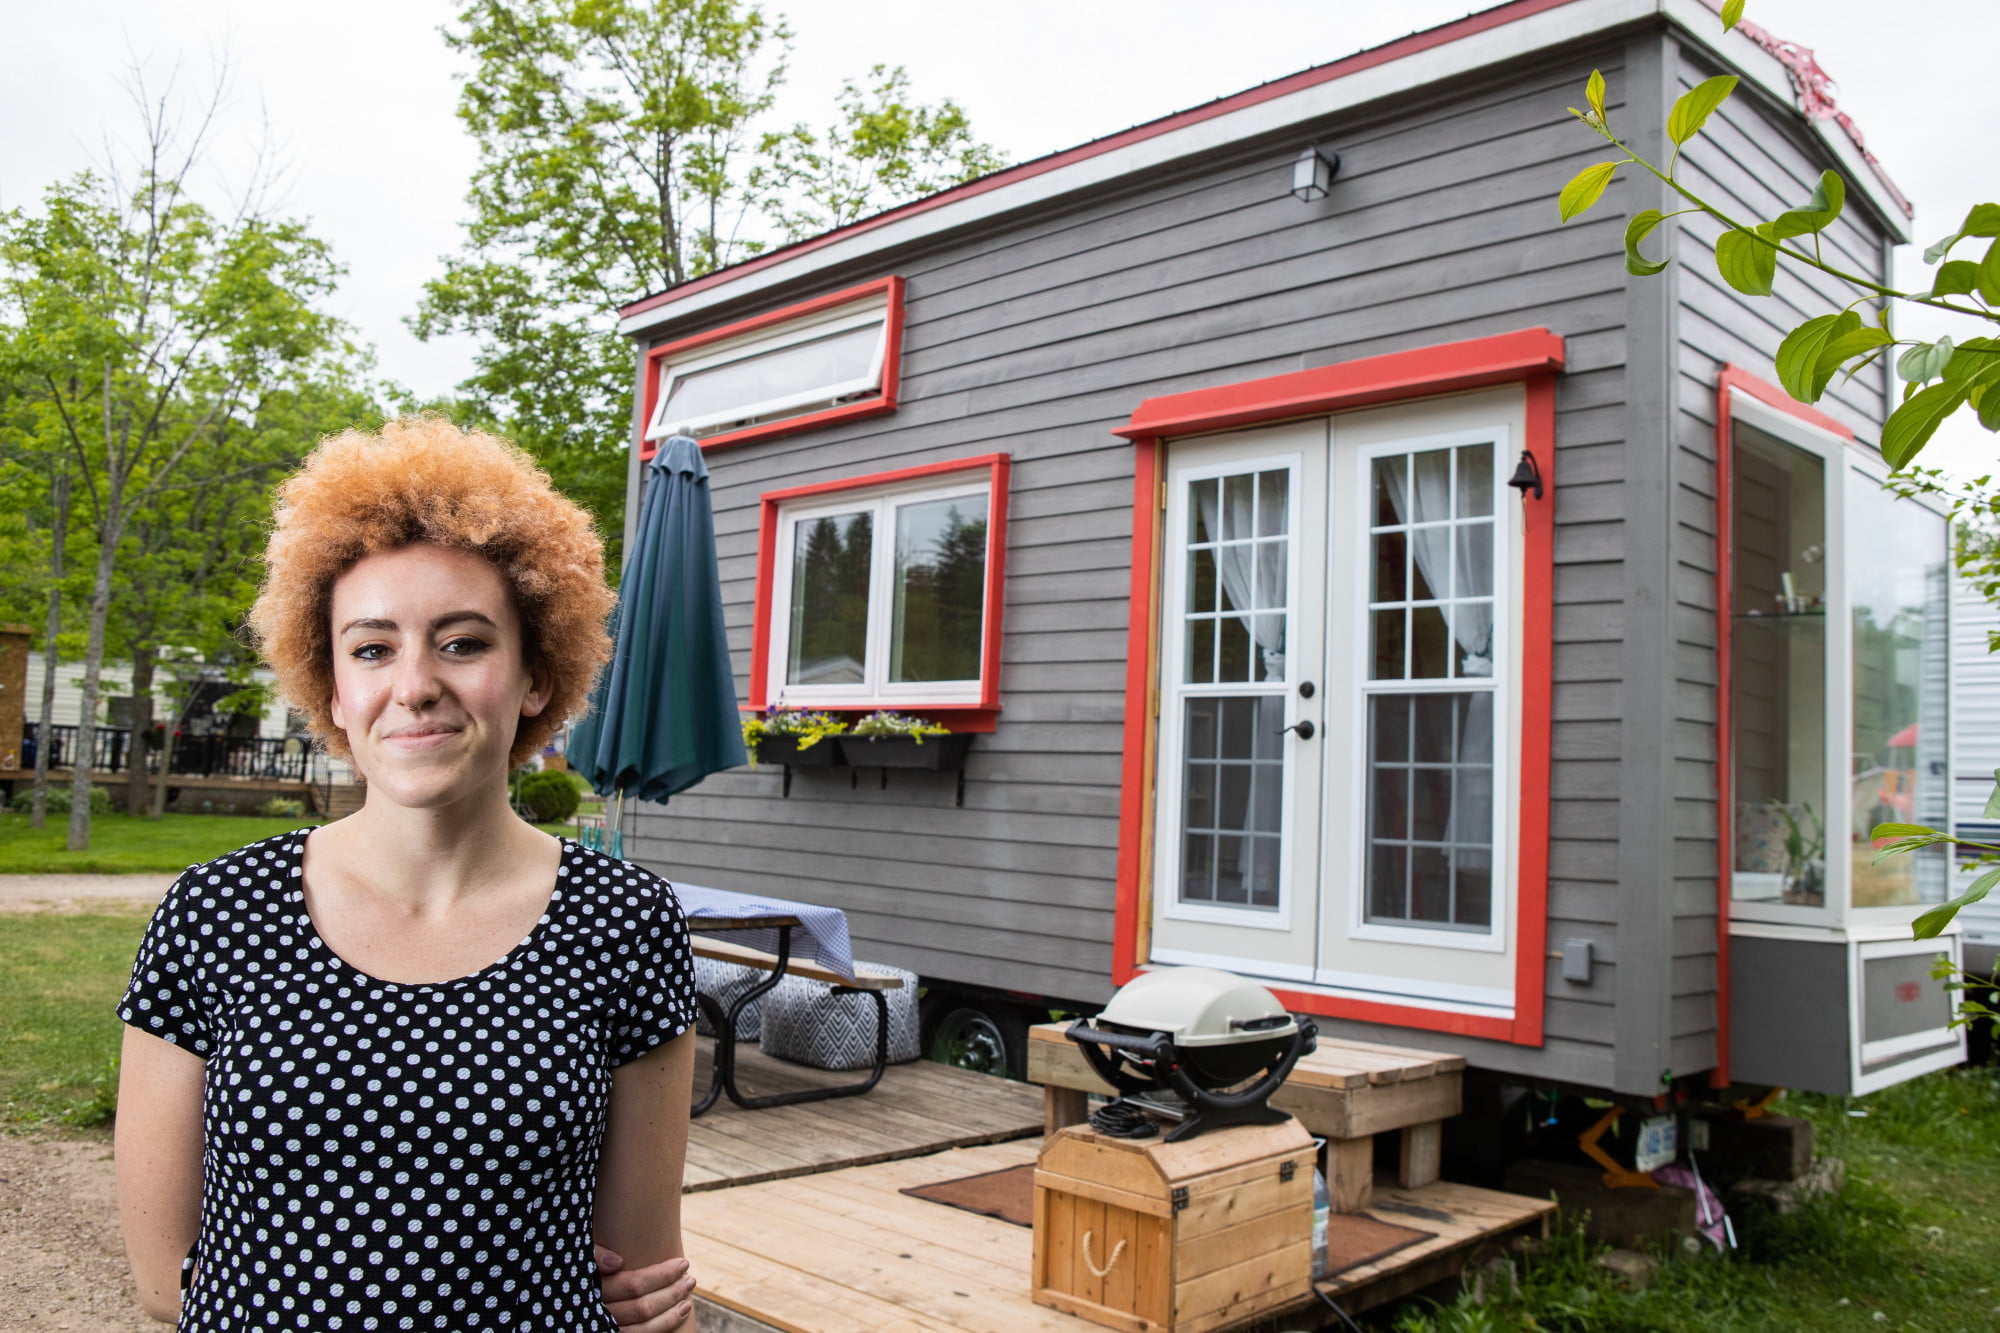 You can create a customized home by building a tiny house from scratch. Here are tips that can help you with the building process.